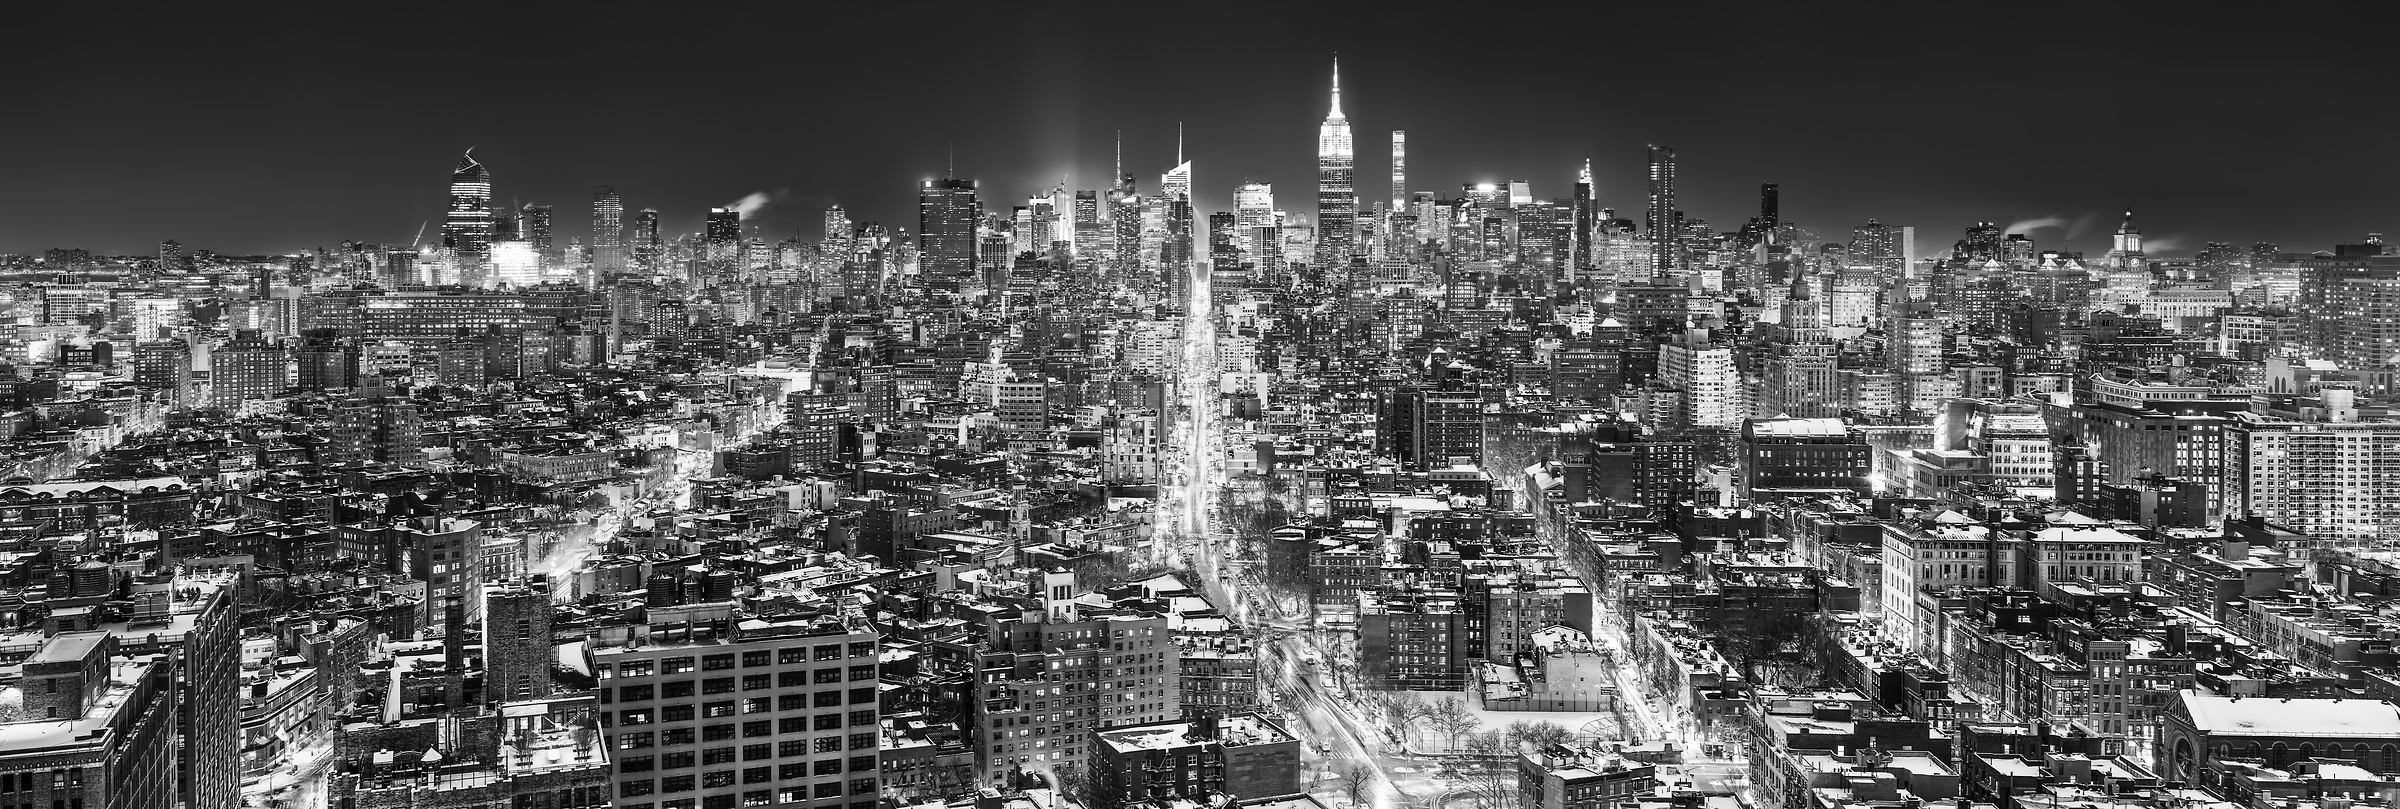 5,910 megapixels! A very high resolution, large-format VAST photo print of the Manhattan NYC skyline in winter snow at night; black and white cityscape fine art photo created by Dan Piech in New York City.